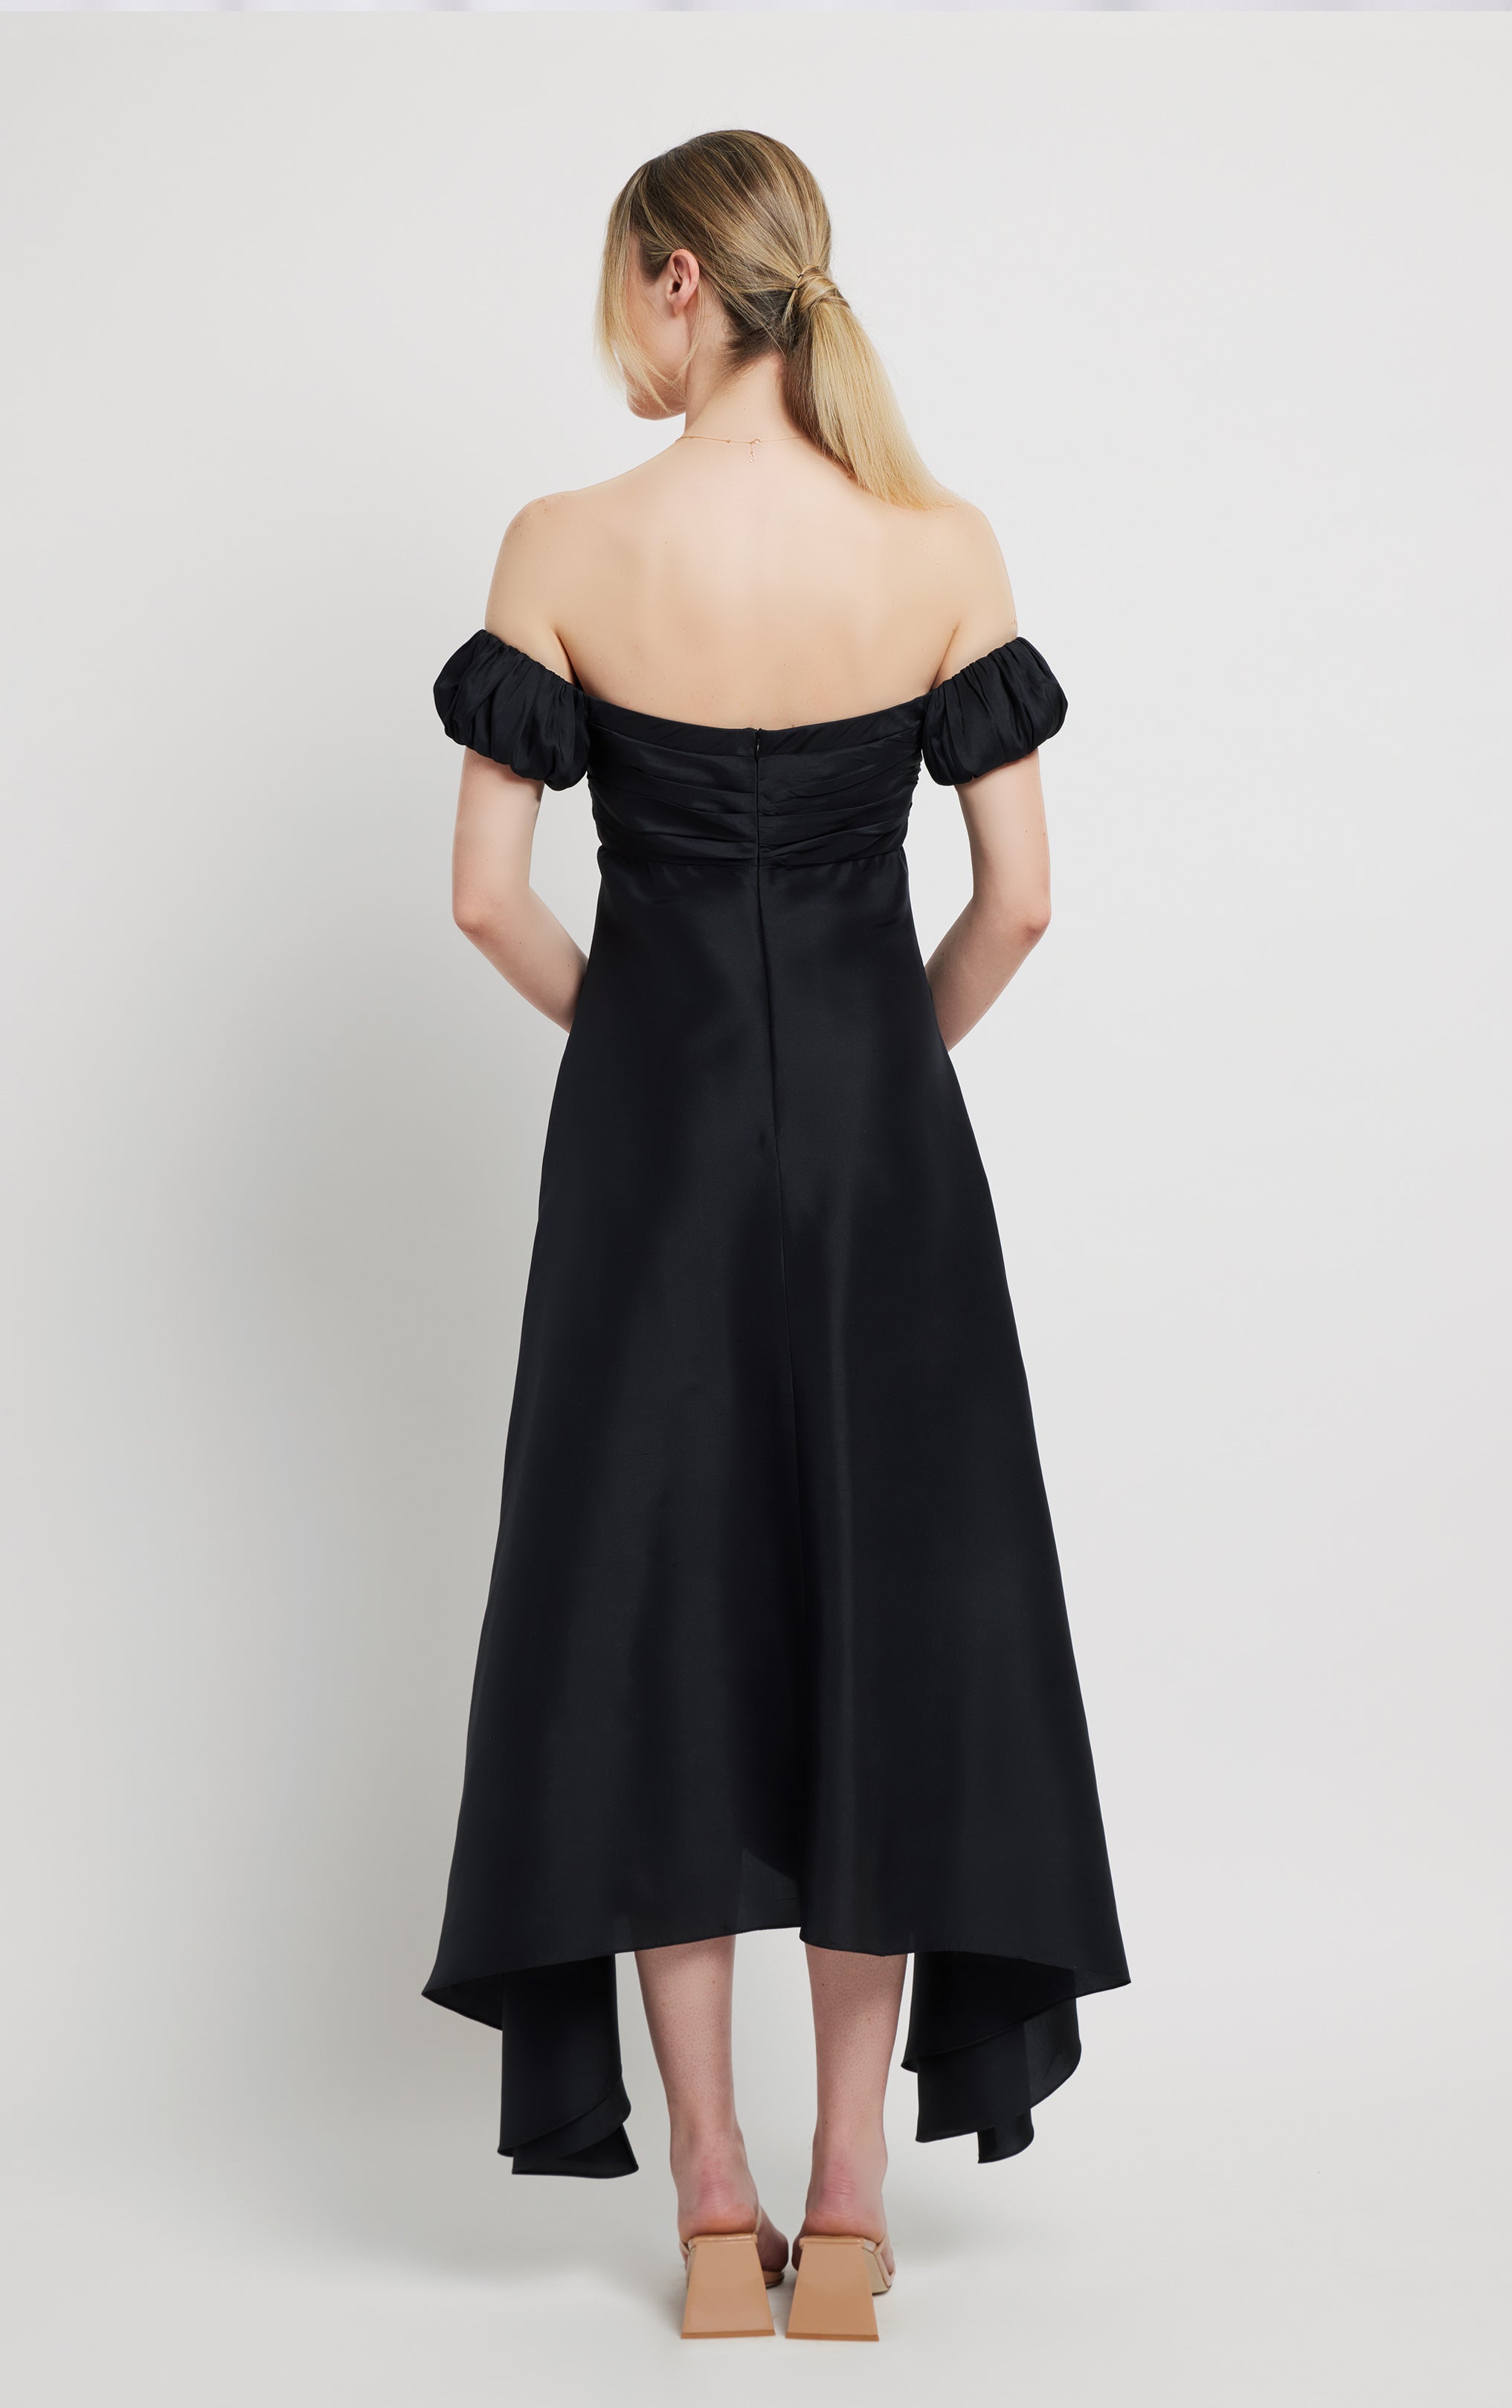 back view of woman standing wearing long silk black off the shoulder dress